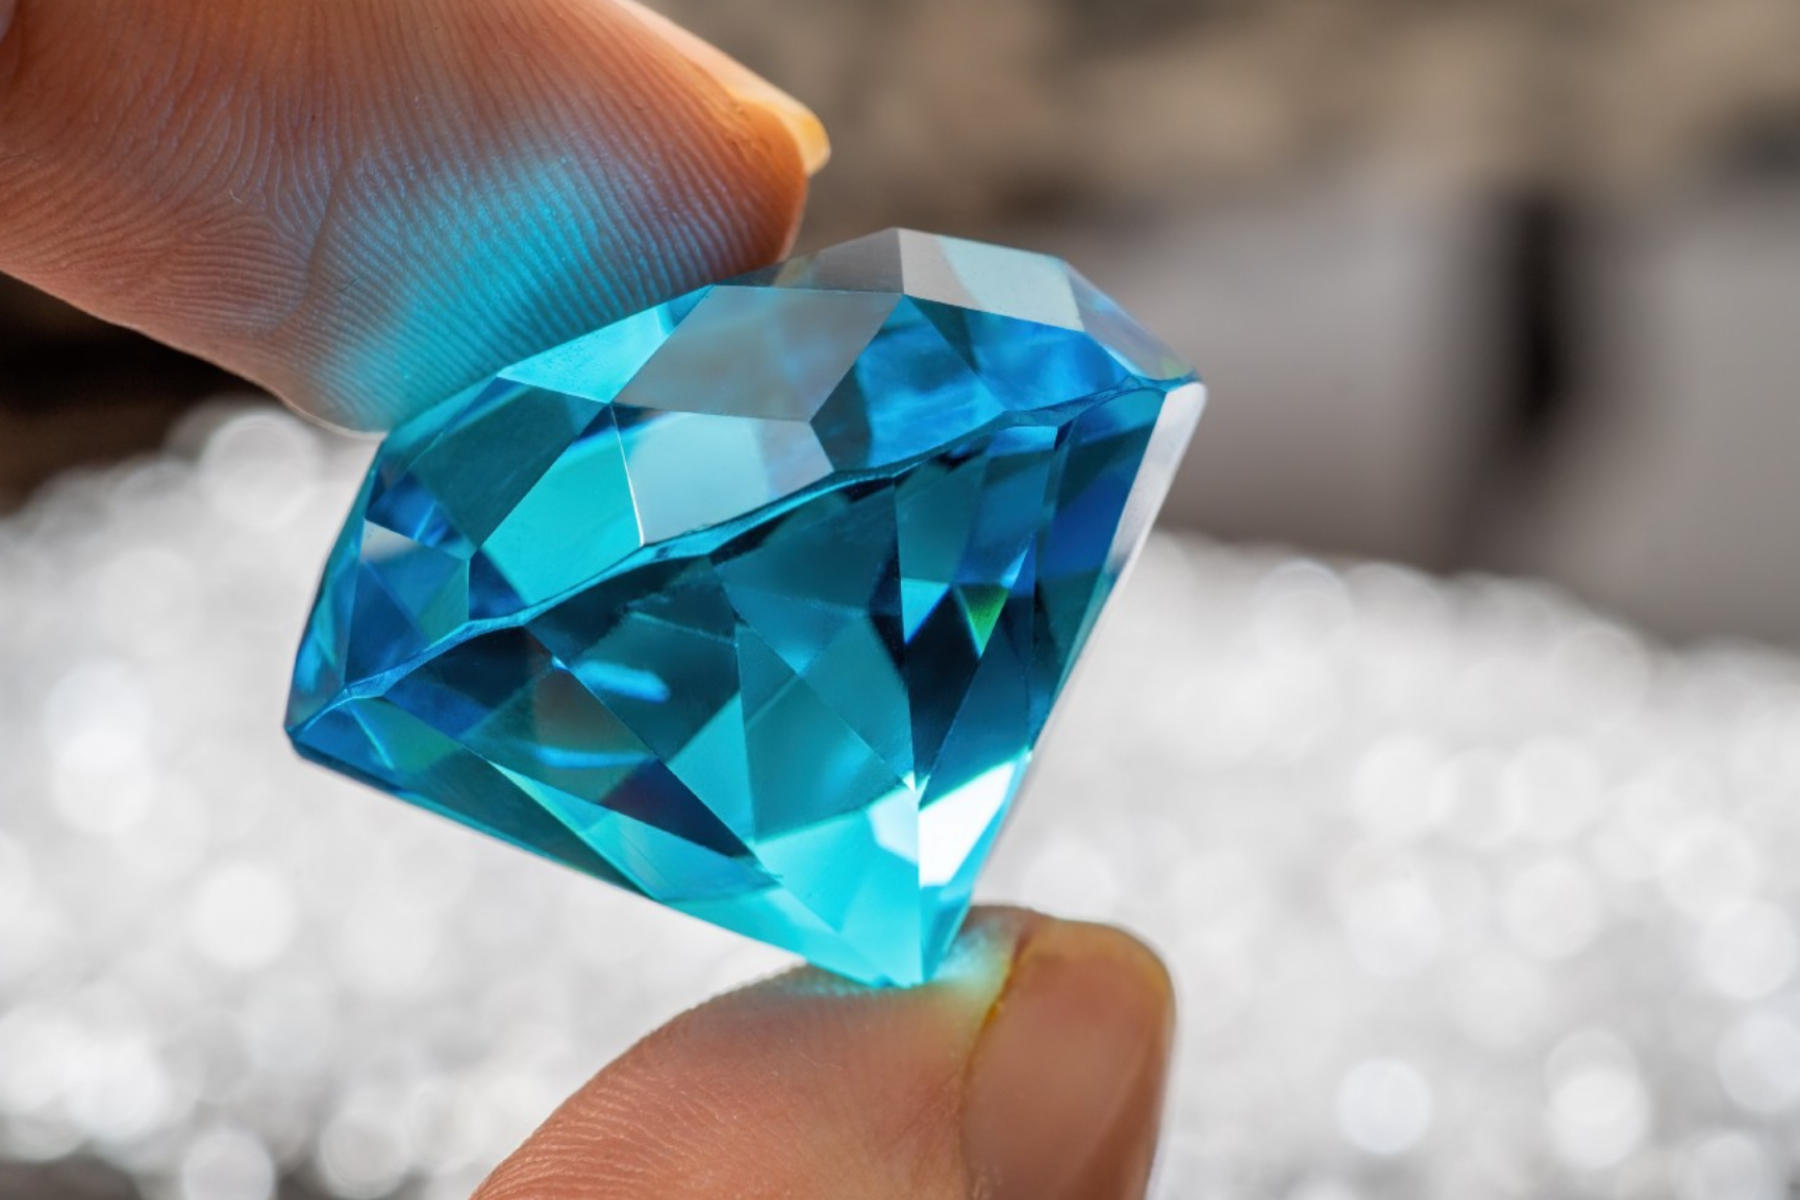 An individual's hand holding a shining blue gem